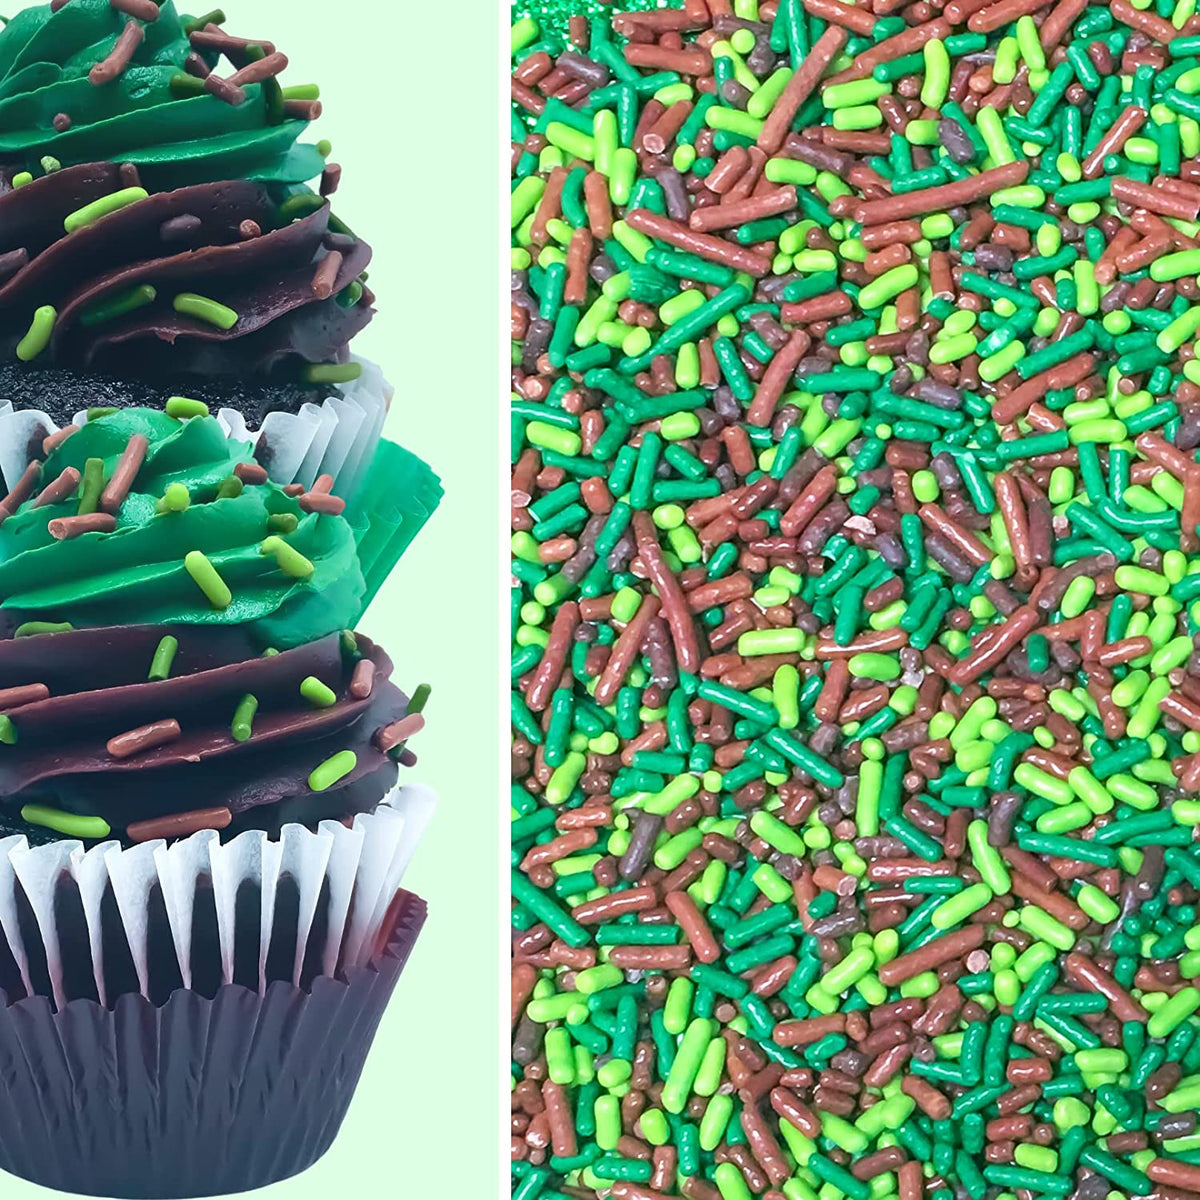 Edible Decoration for Cake Sprinkles Mixes, Jimmie Colorful